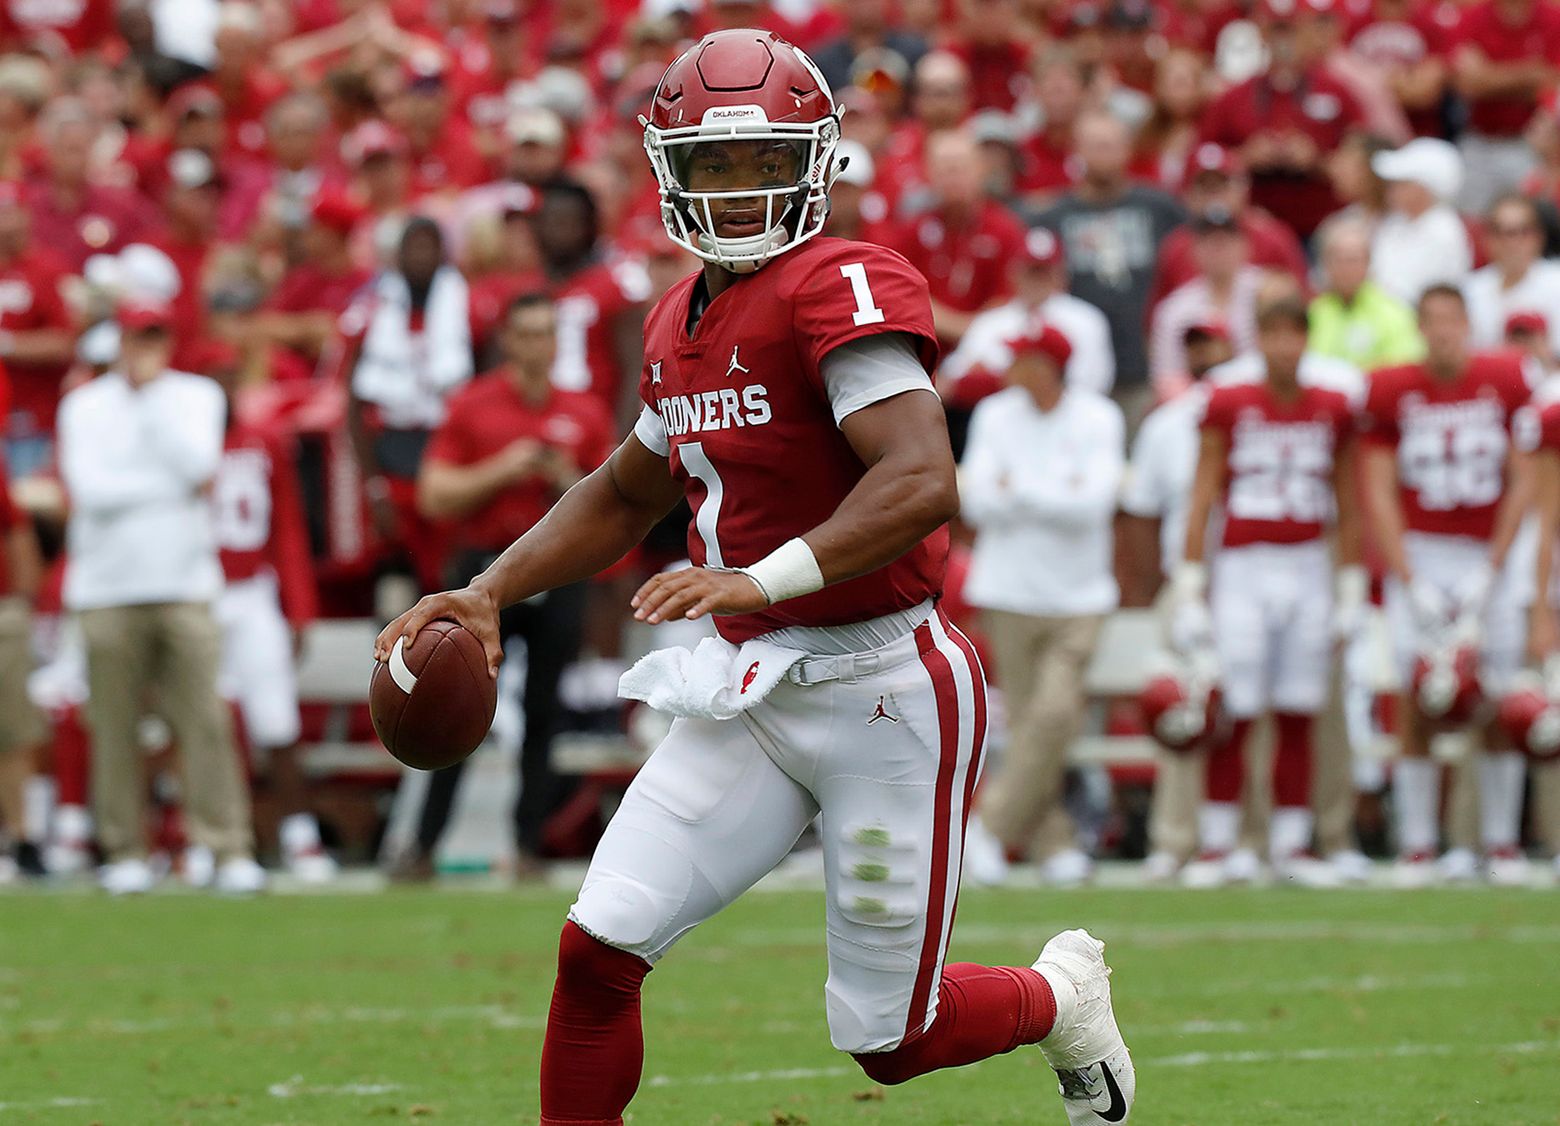 Exactly how tall is Kyler Murray anyway?